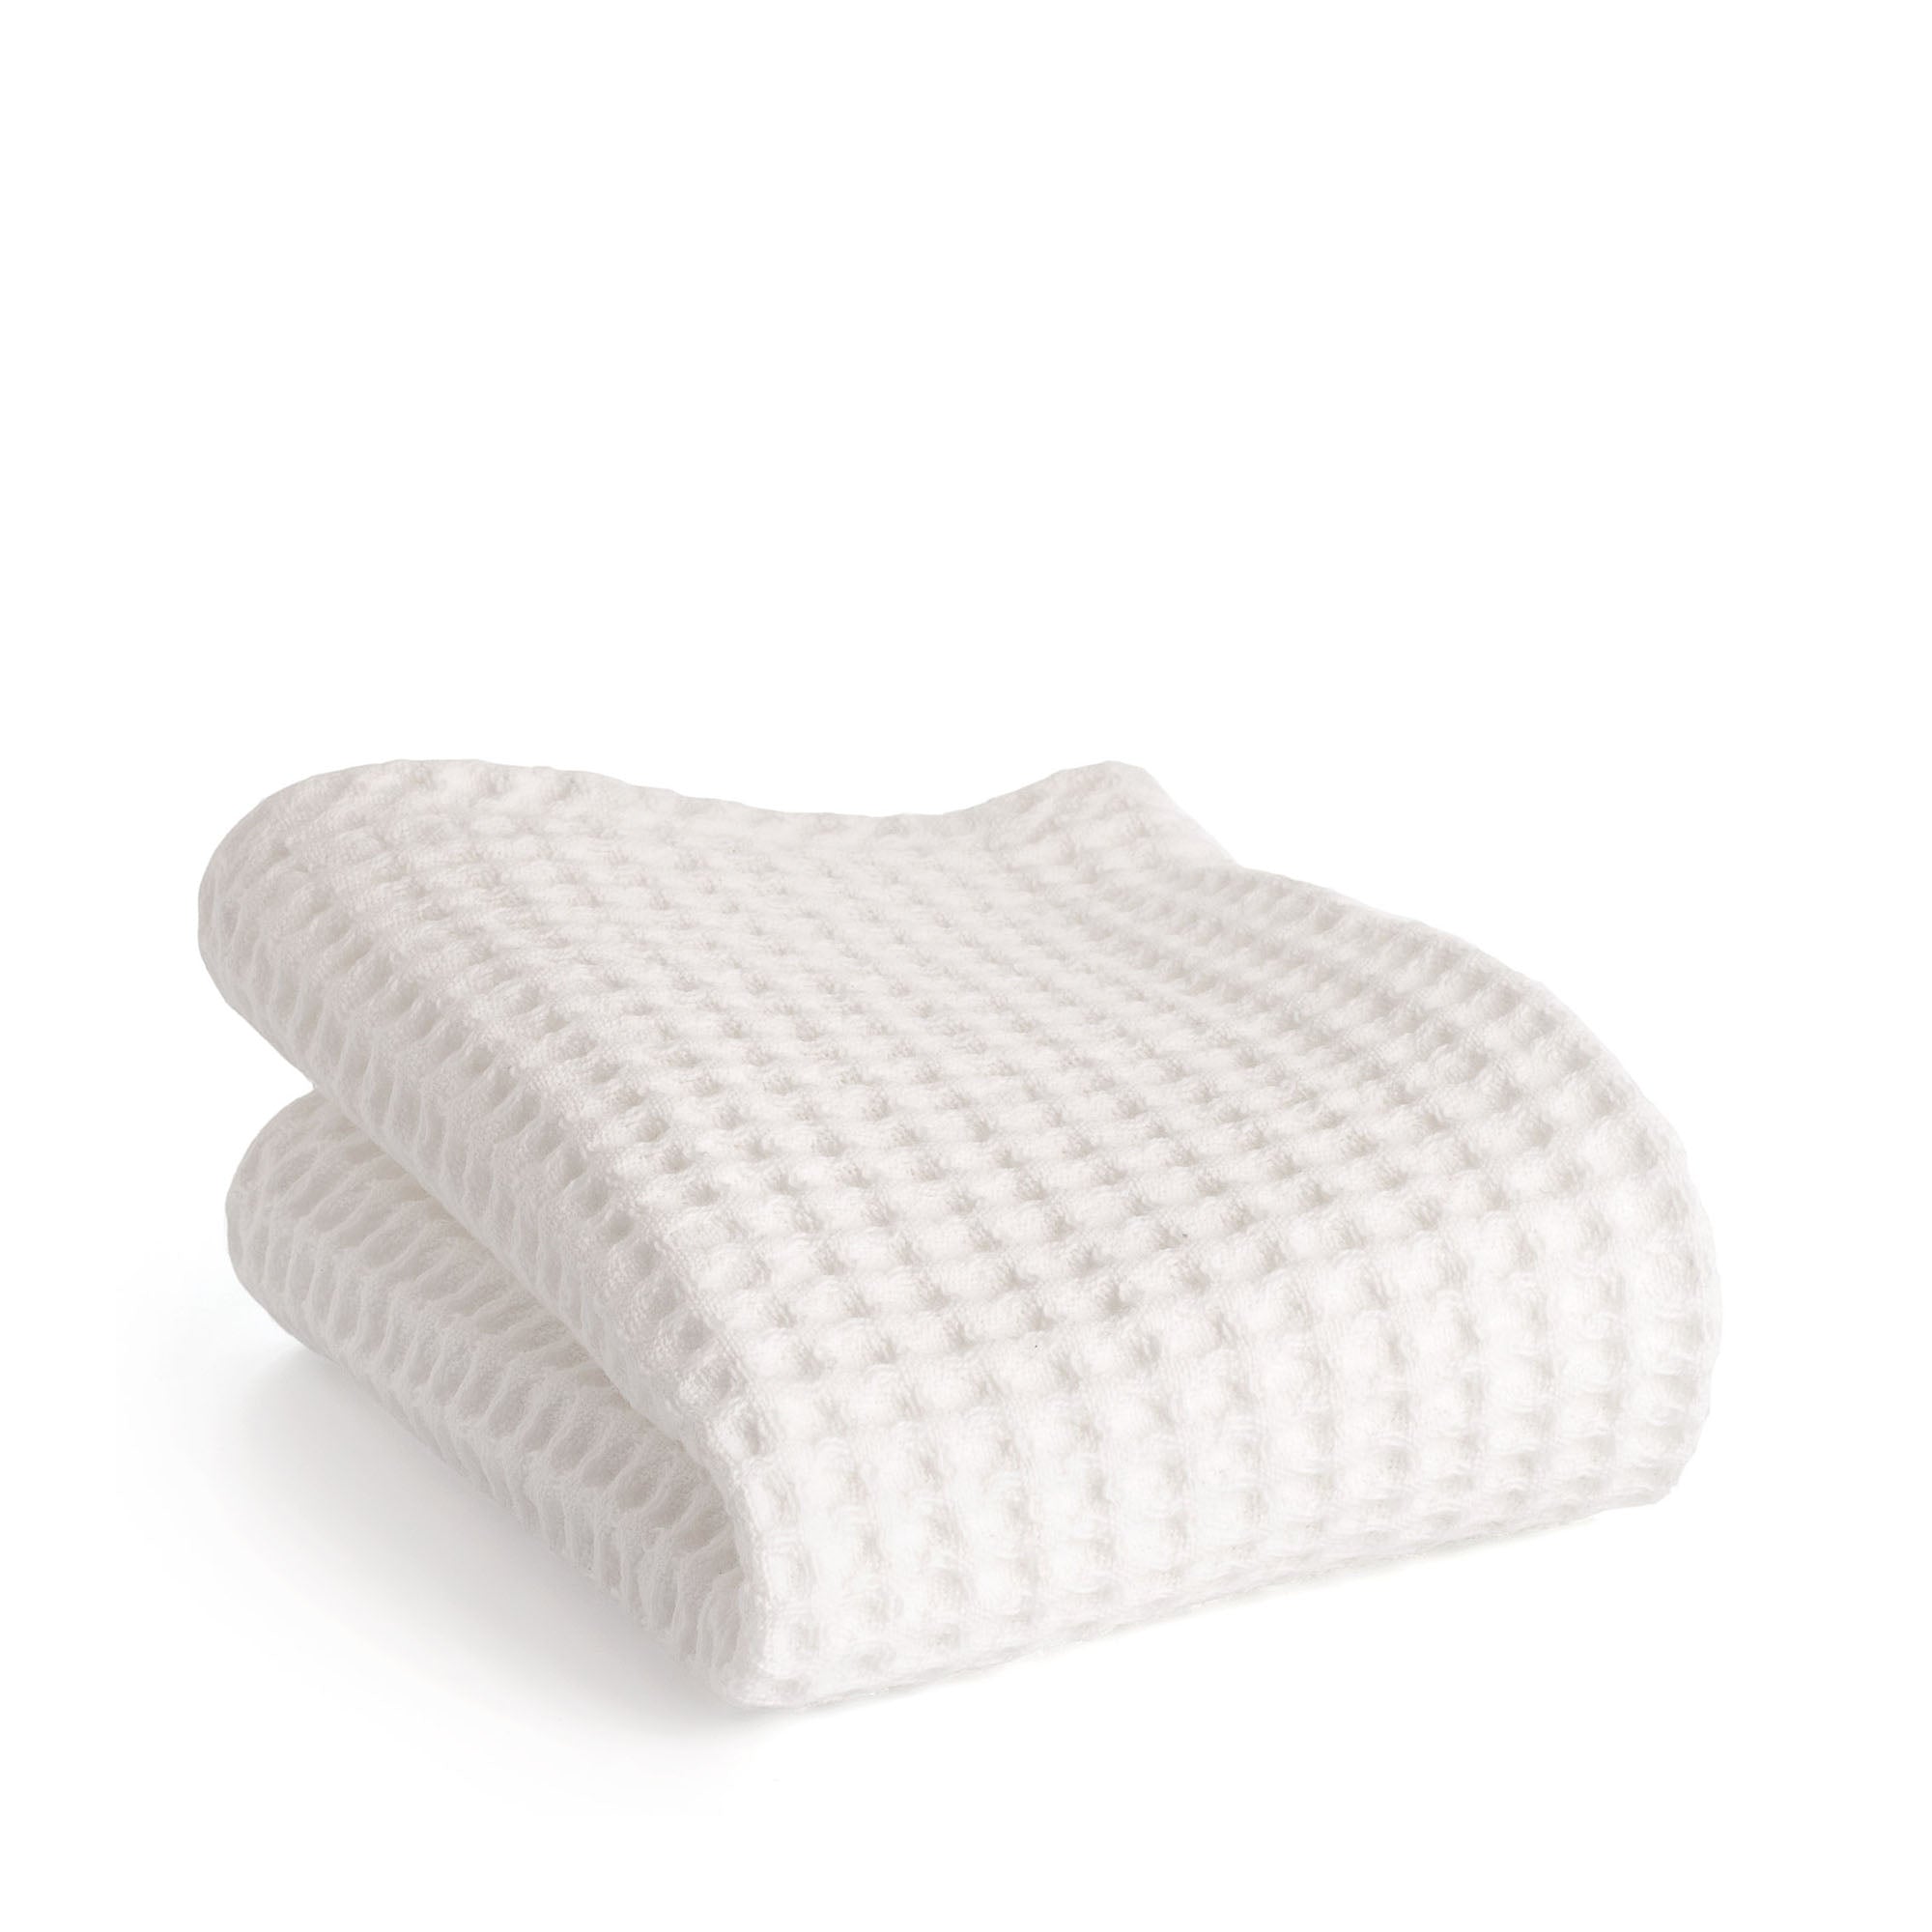 MÜHLE 'Waffle Pique' Shaving Towels, 2-Pack